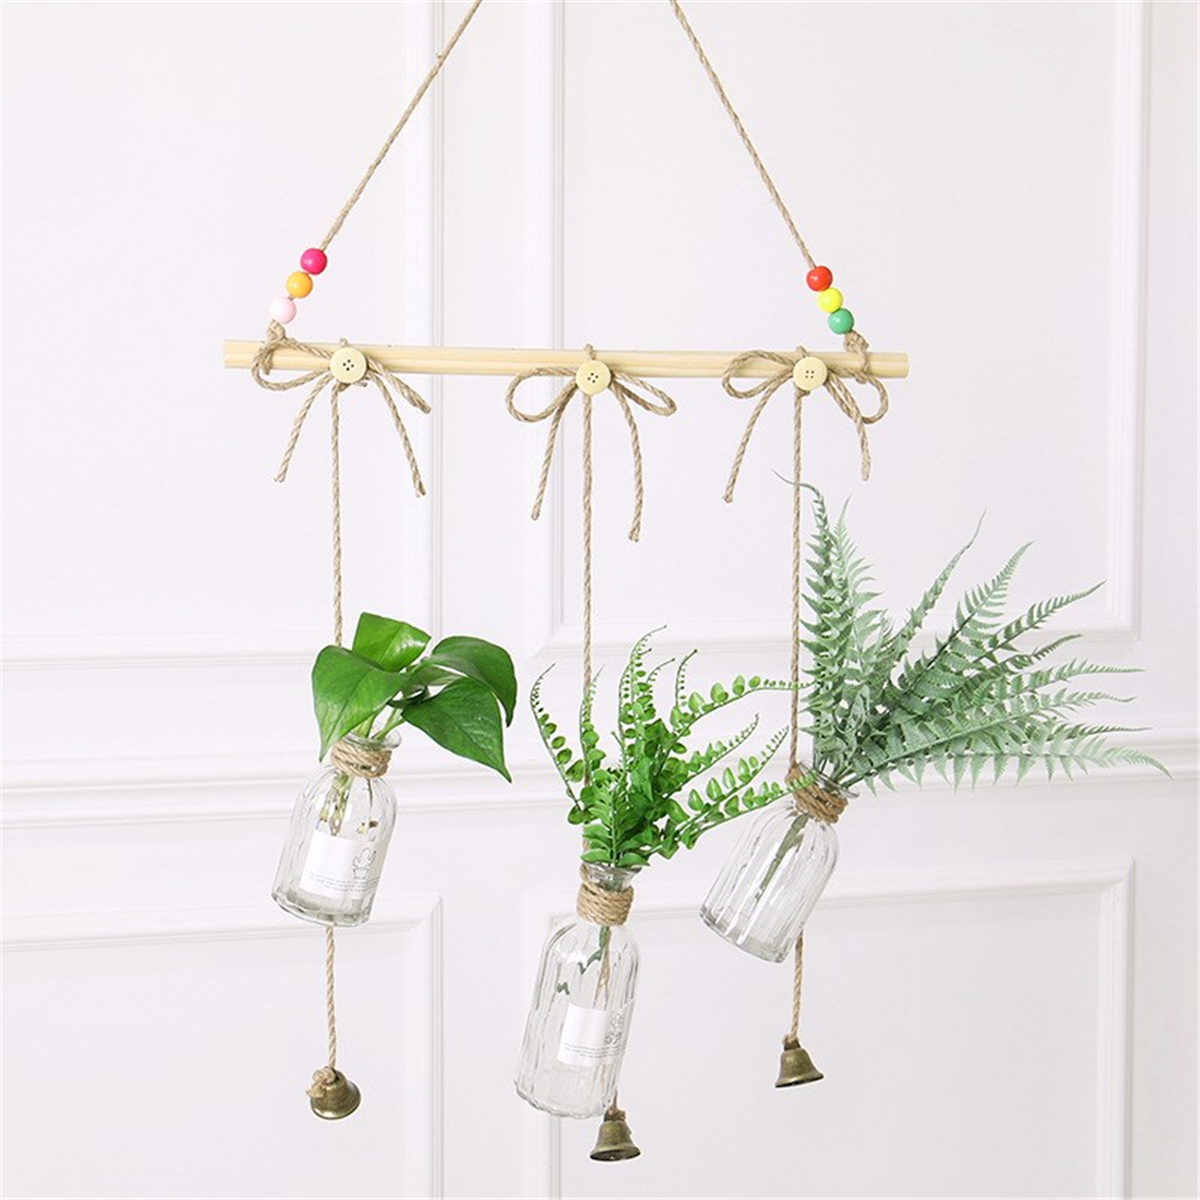 Hanging-Clear-Glass-Flower-Plant-Hydroponic-System-Vase-Terrarium-Container-Home-Garden-1438290-6